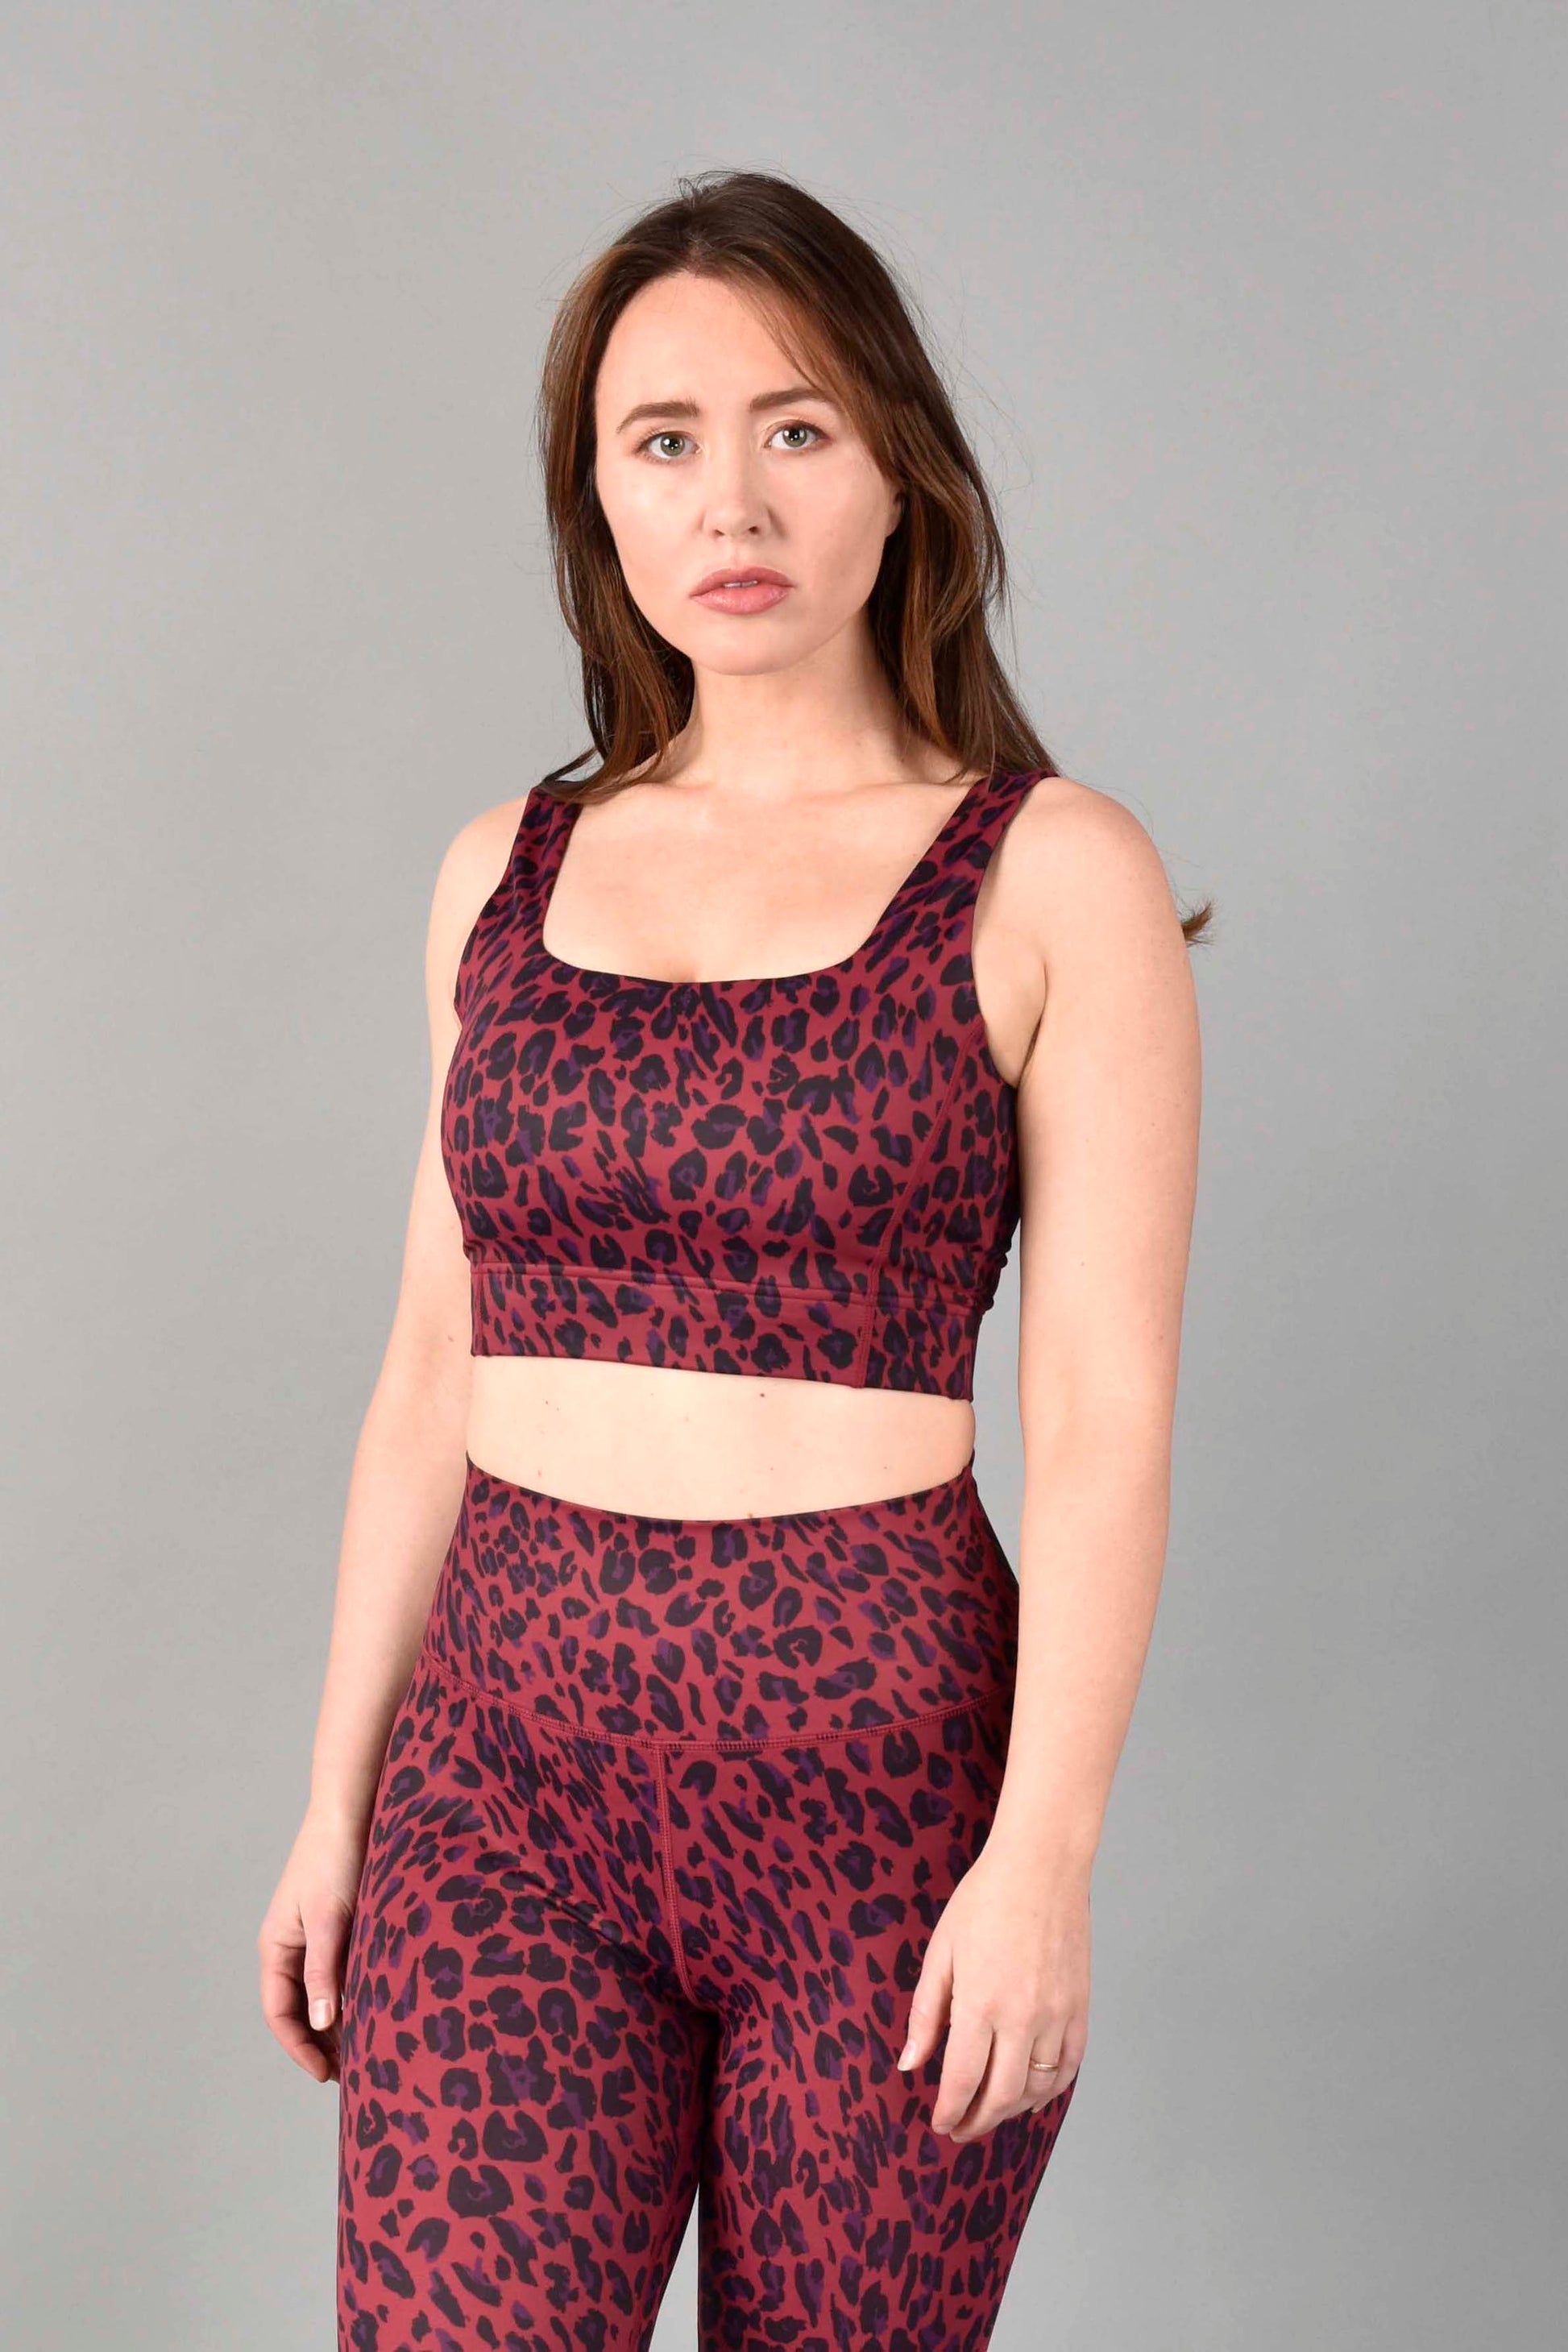 Wear Love More Brigitte Longline Sports Bra in Recycled Luxe Red Velvet Leopard.  Longline bra with square neckline with V-back , wide straps in a red leopard print.  Fabric is made from Recycled Polyester.  Fully lined with removable padding. Designer Sustainable Activewear